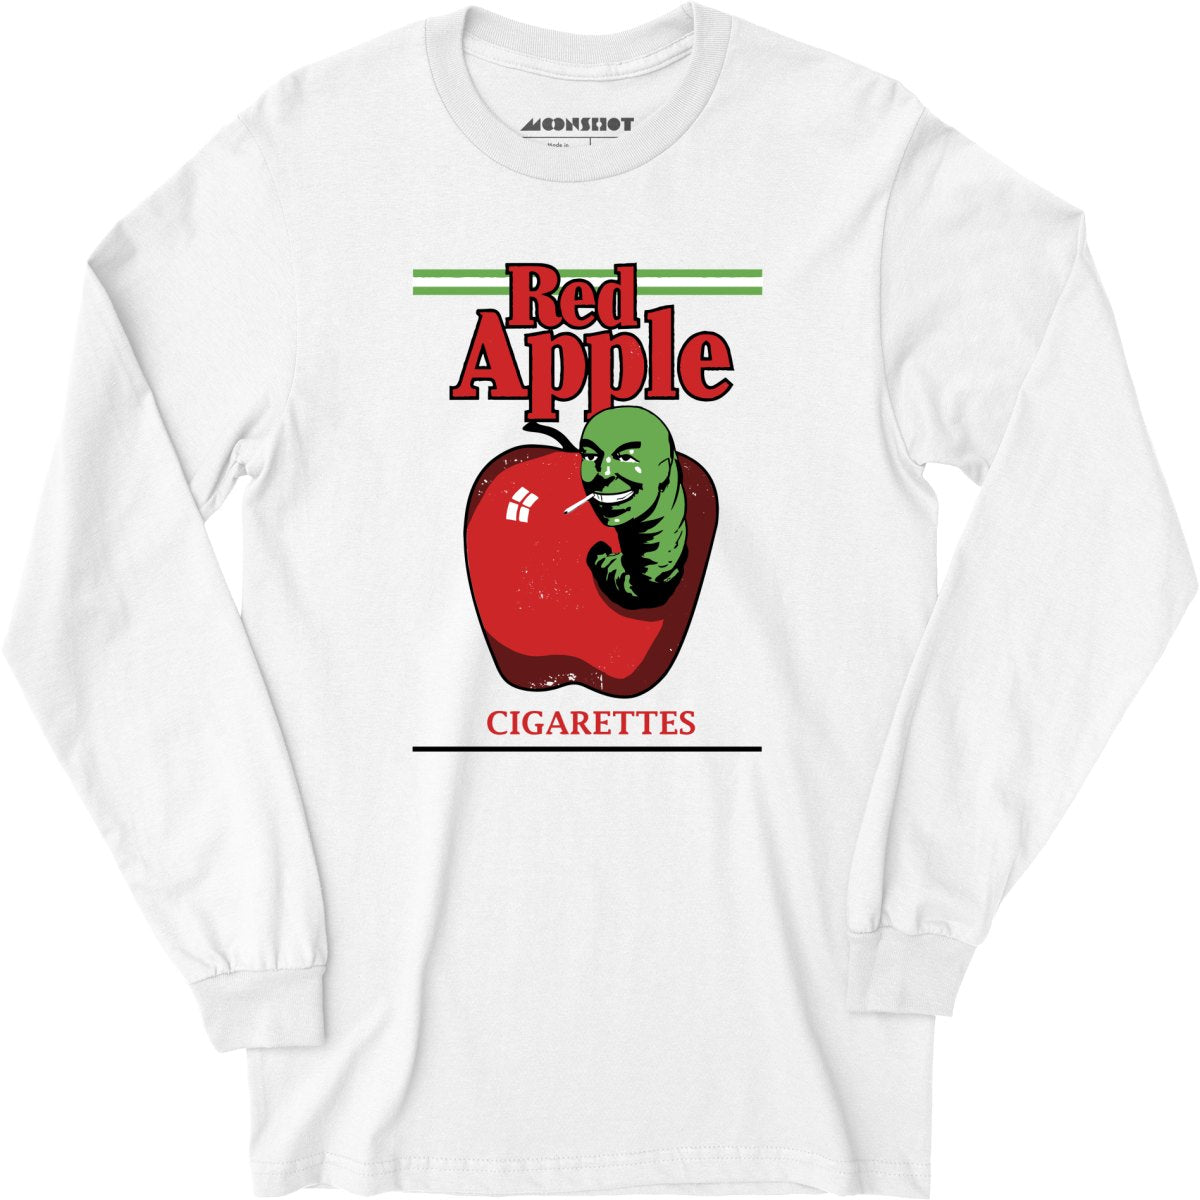 Red Apple Cigarettes - Long Sleeve T-Shirt